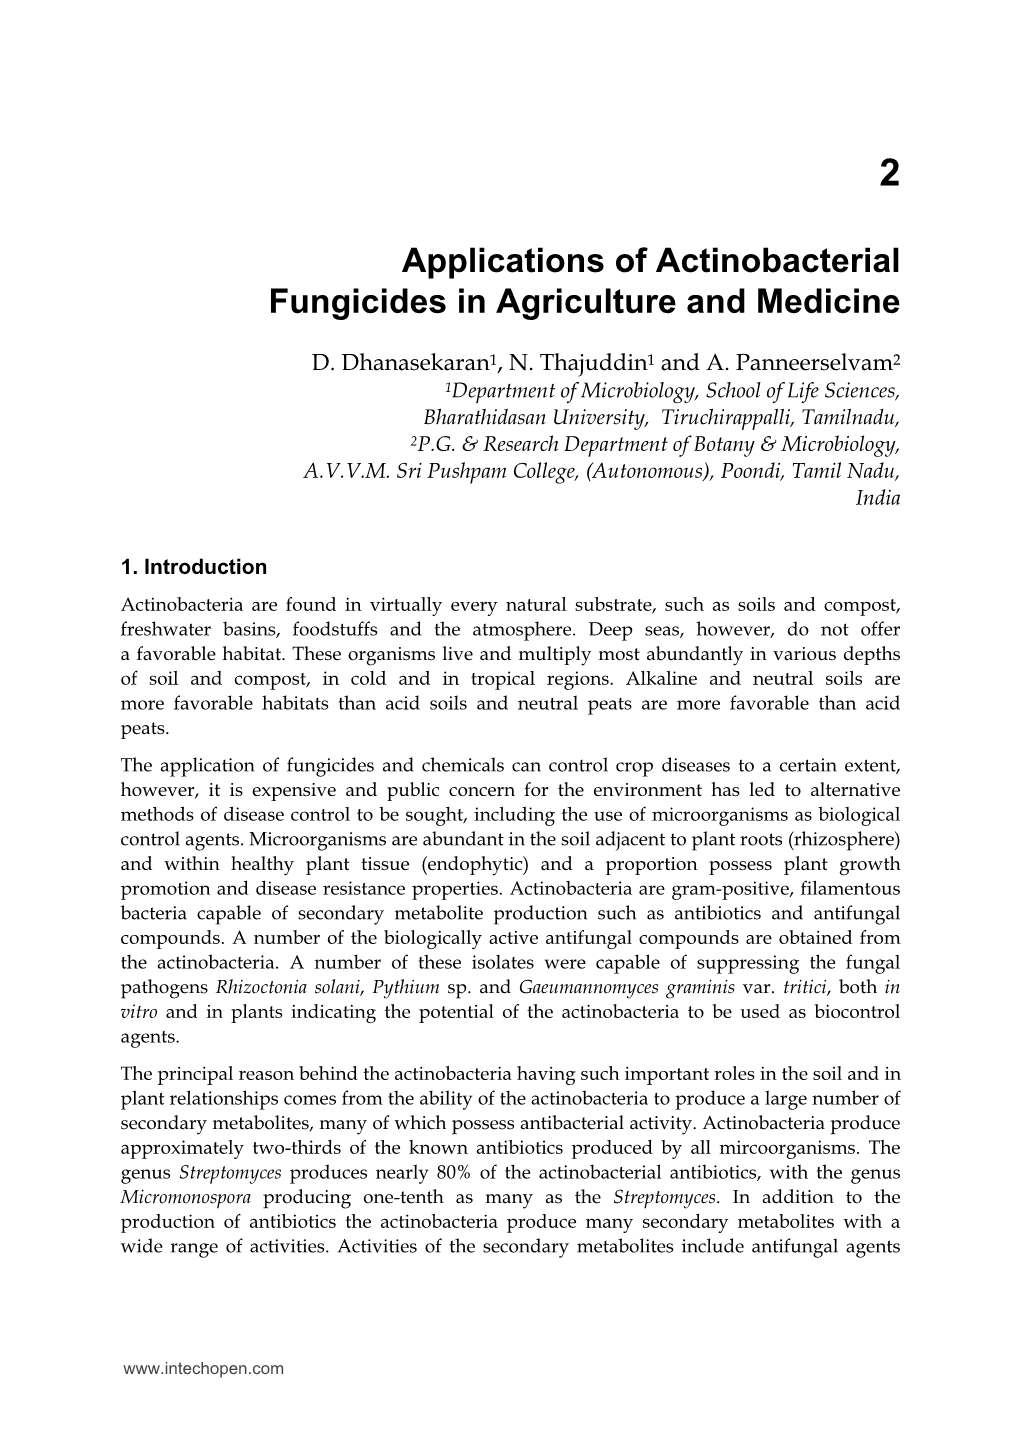 Applications of Actinobacterial Fungicides in Agriculture and Medicine